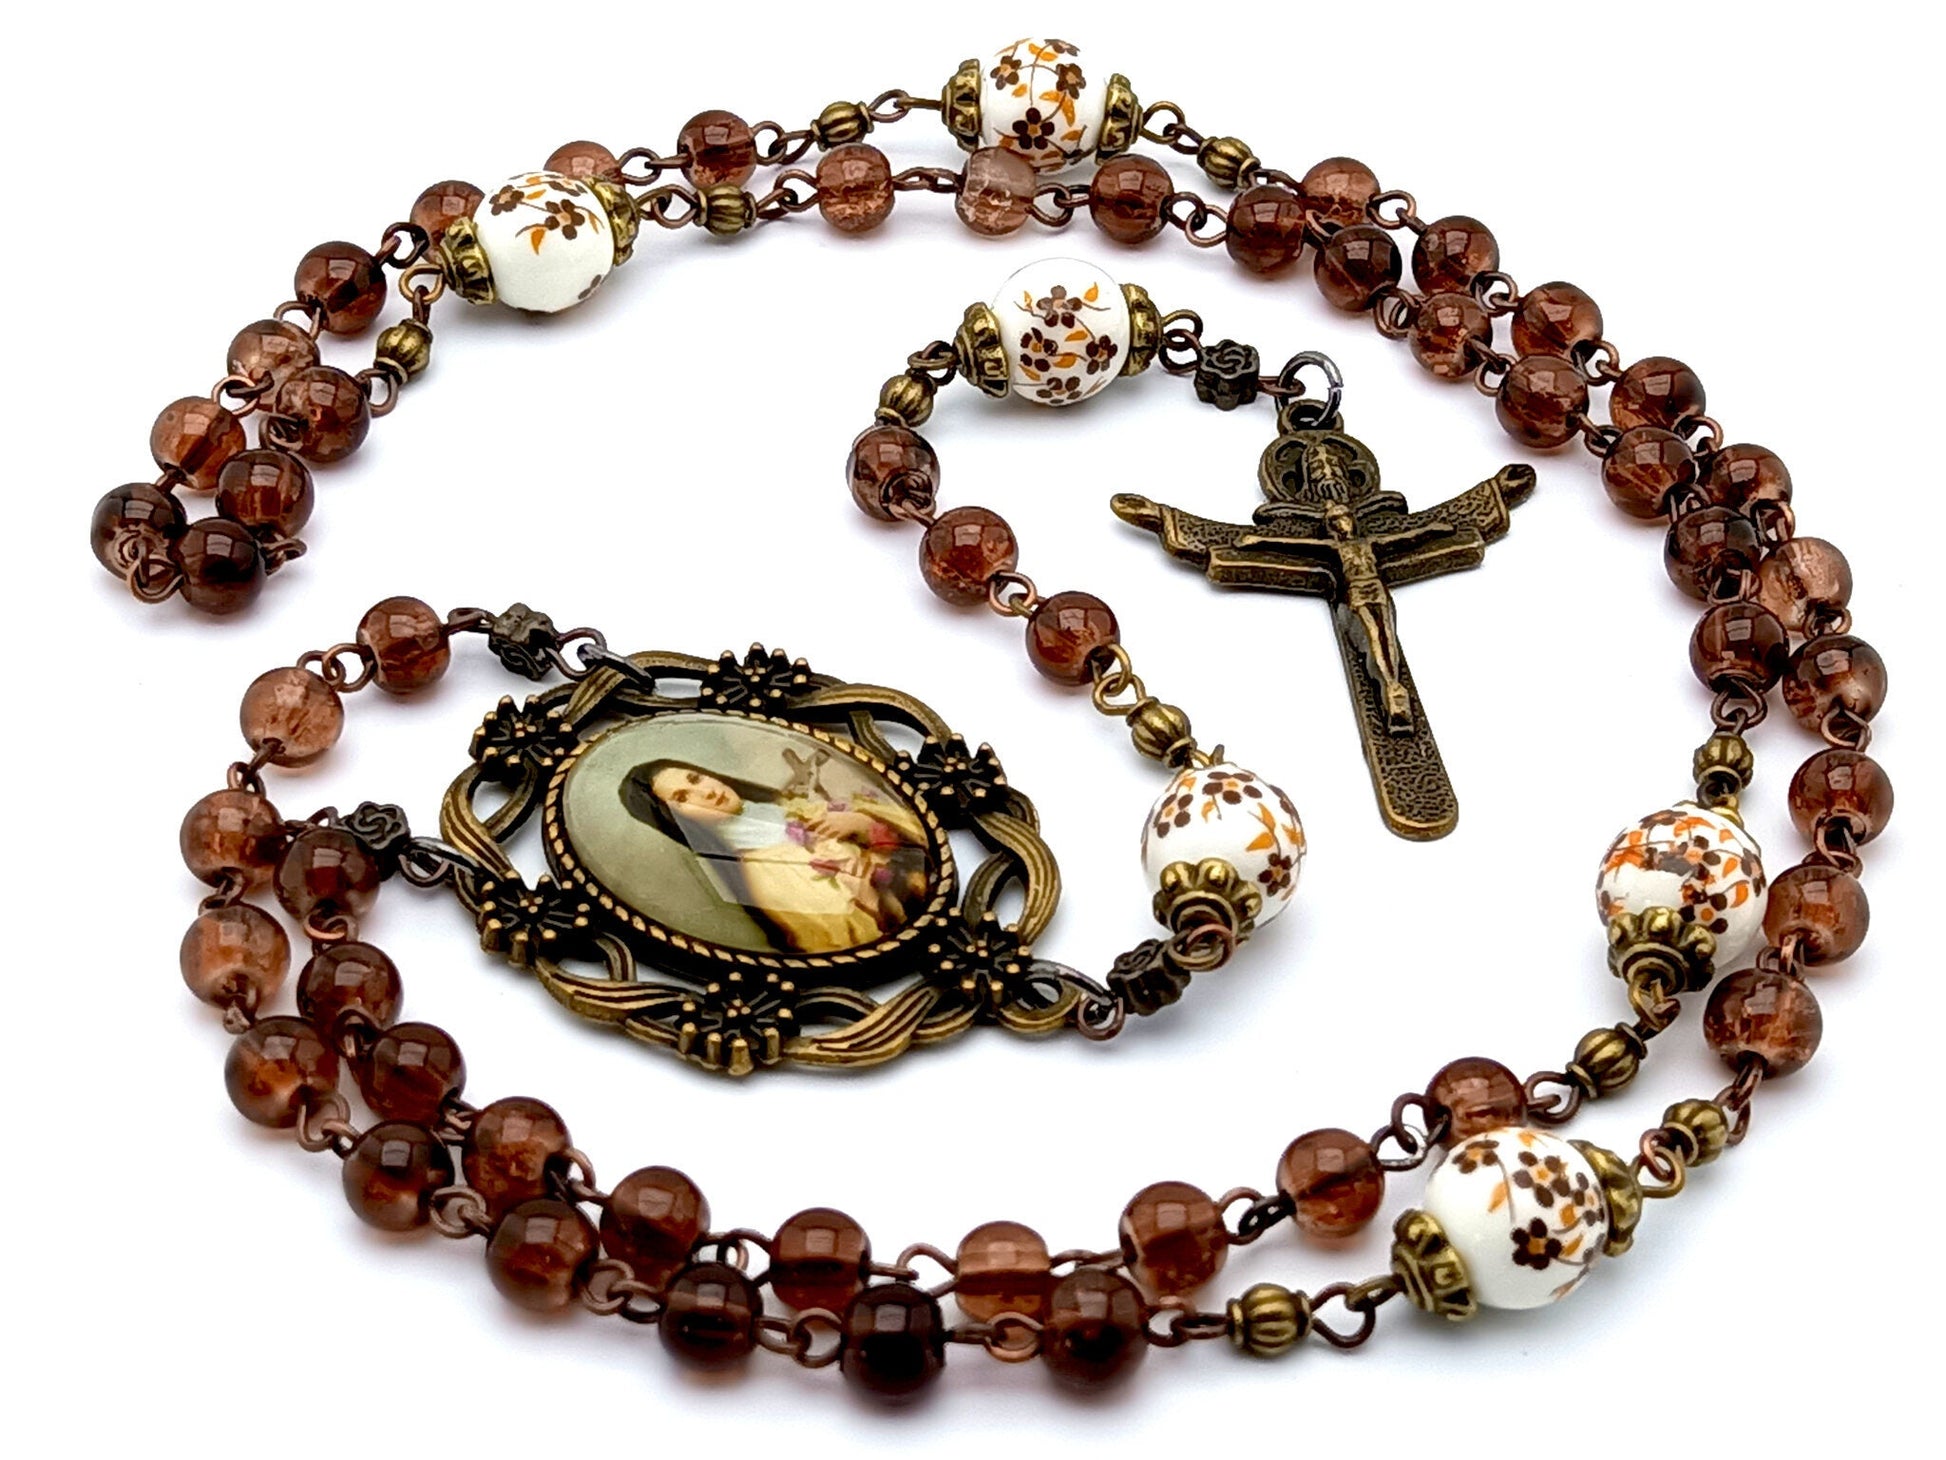 Saint Therese unique rosary beads with dark red glass and floral porcelain beads, bronze Holy Trinity crucifix and  picture centre medal.